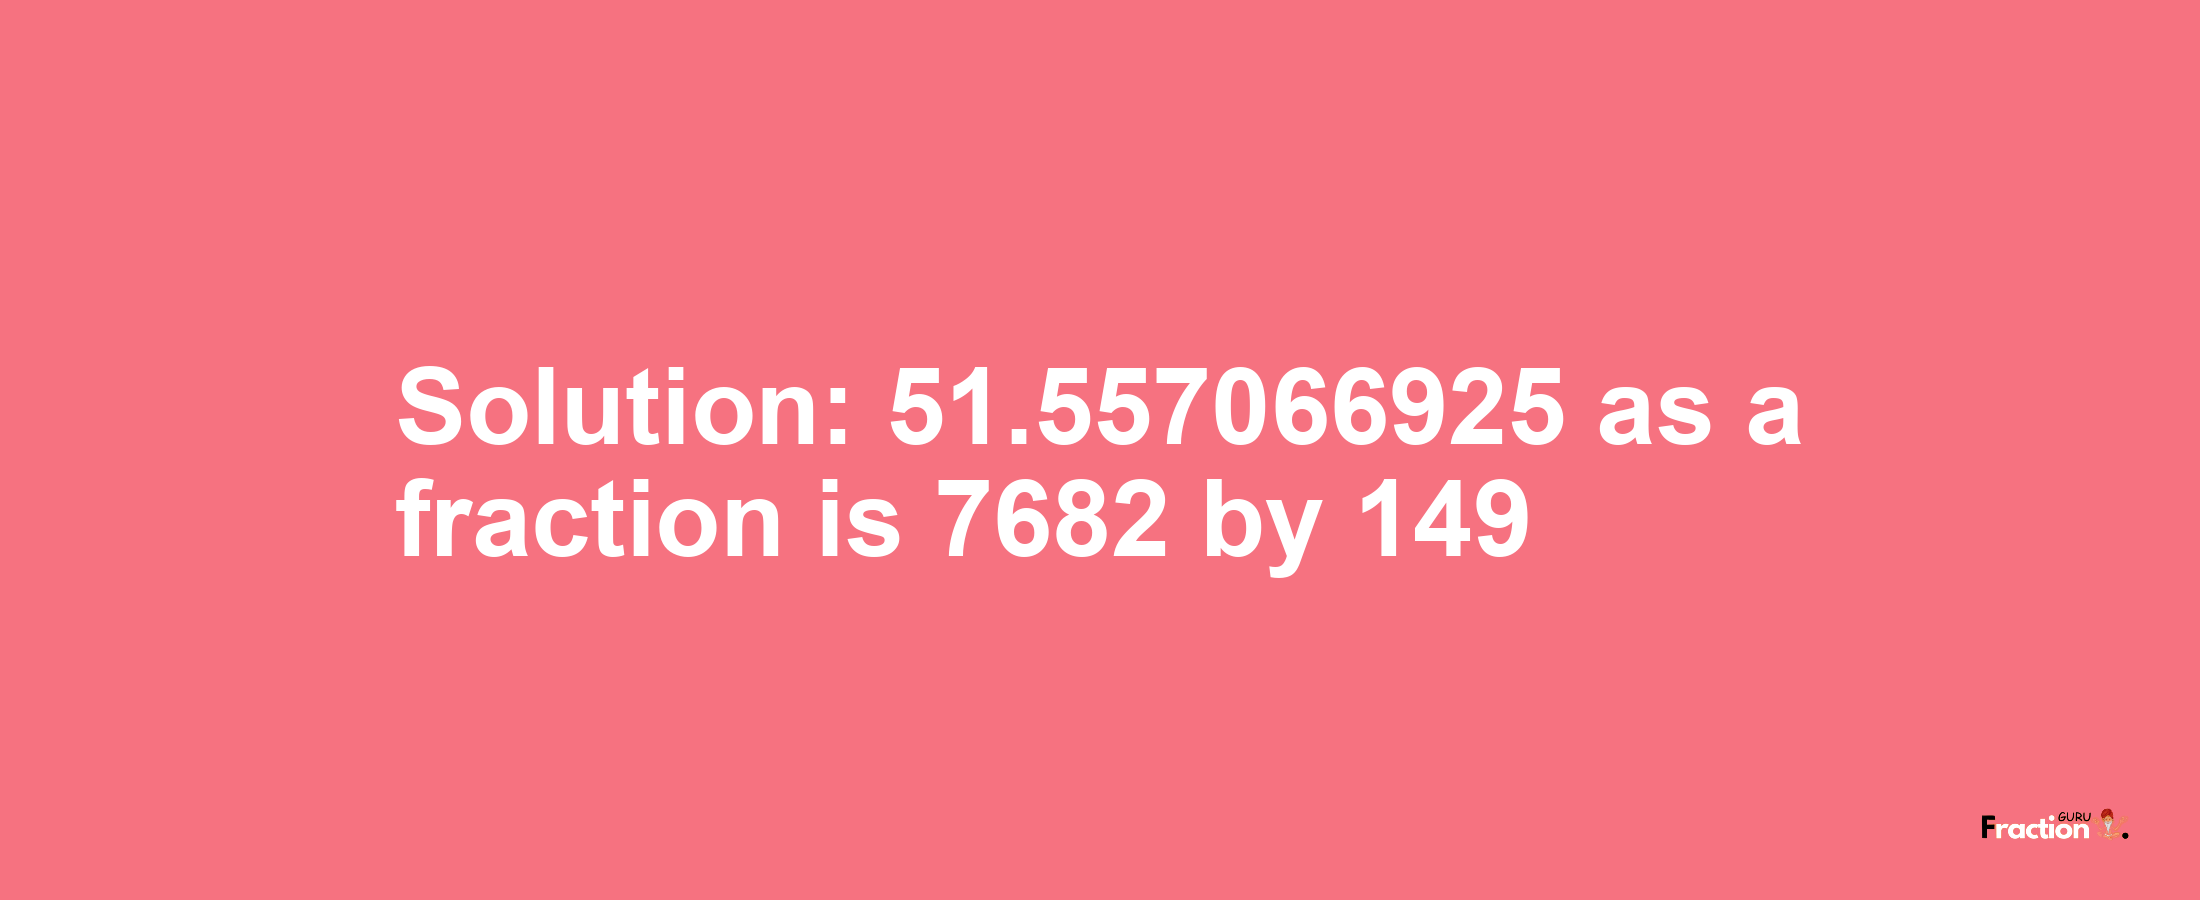 Solution:51.557066925 as a fraction is 7682/149